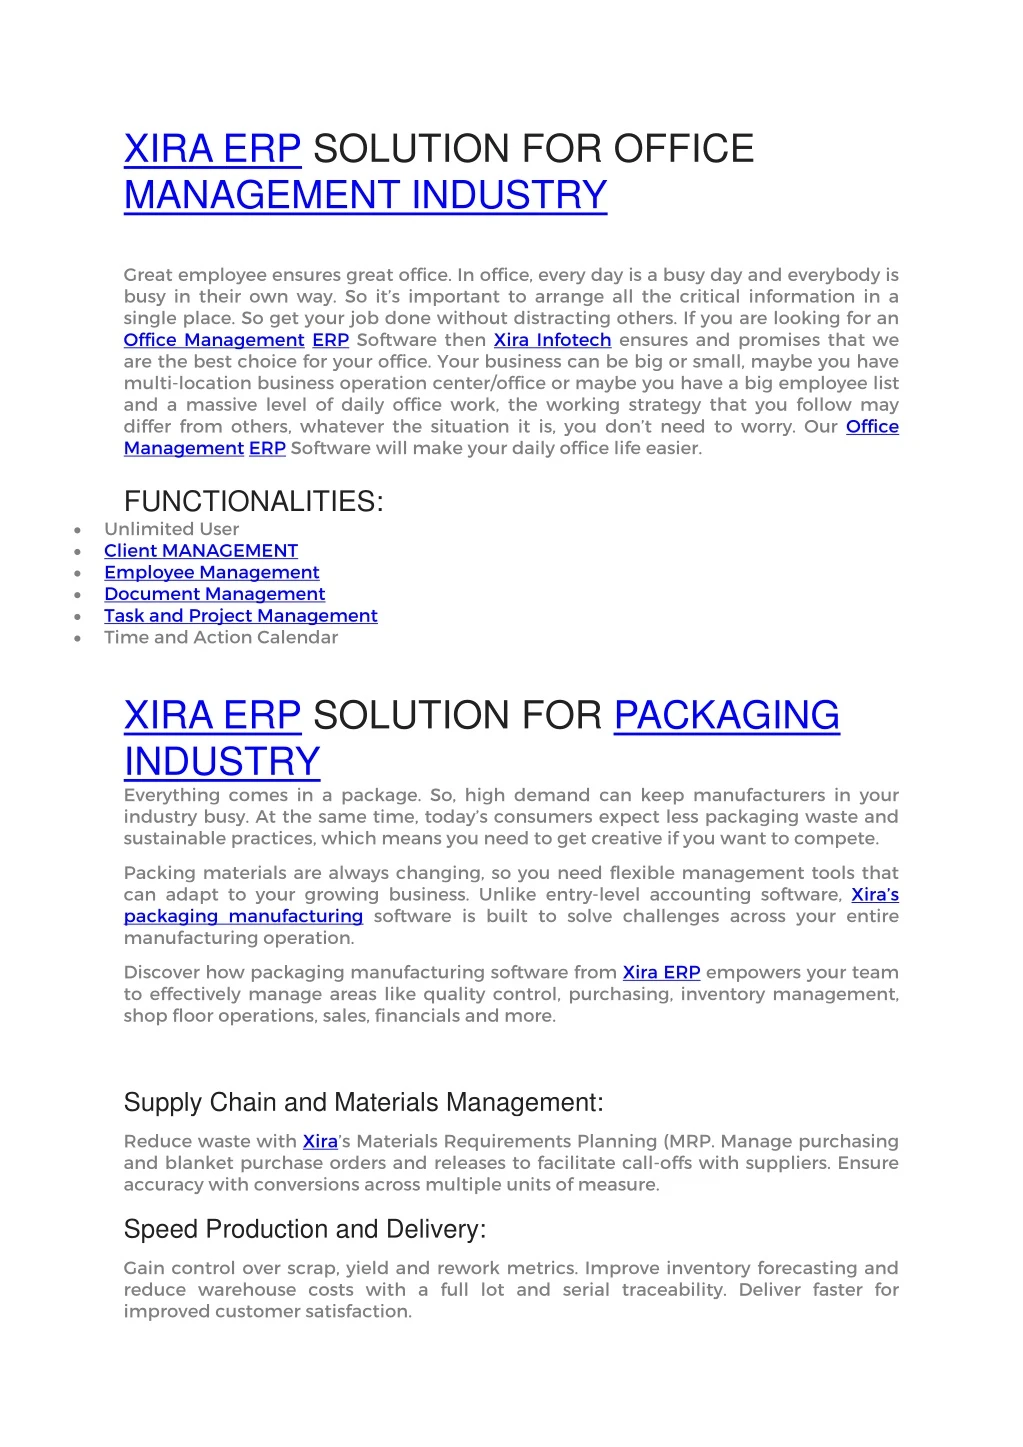 xira erp solution for office management industry